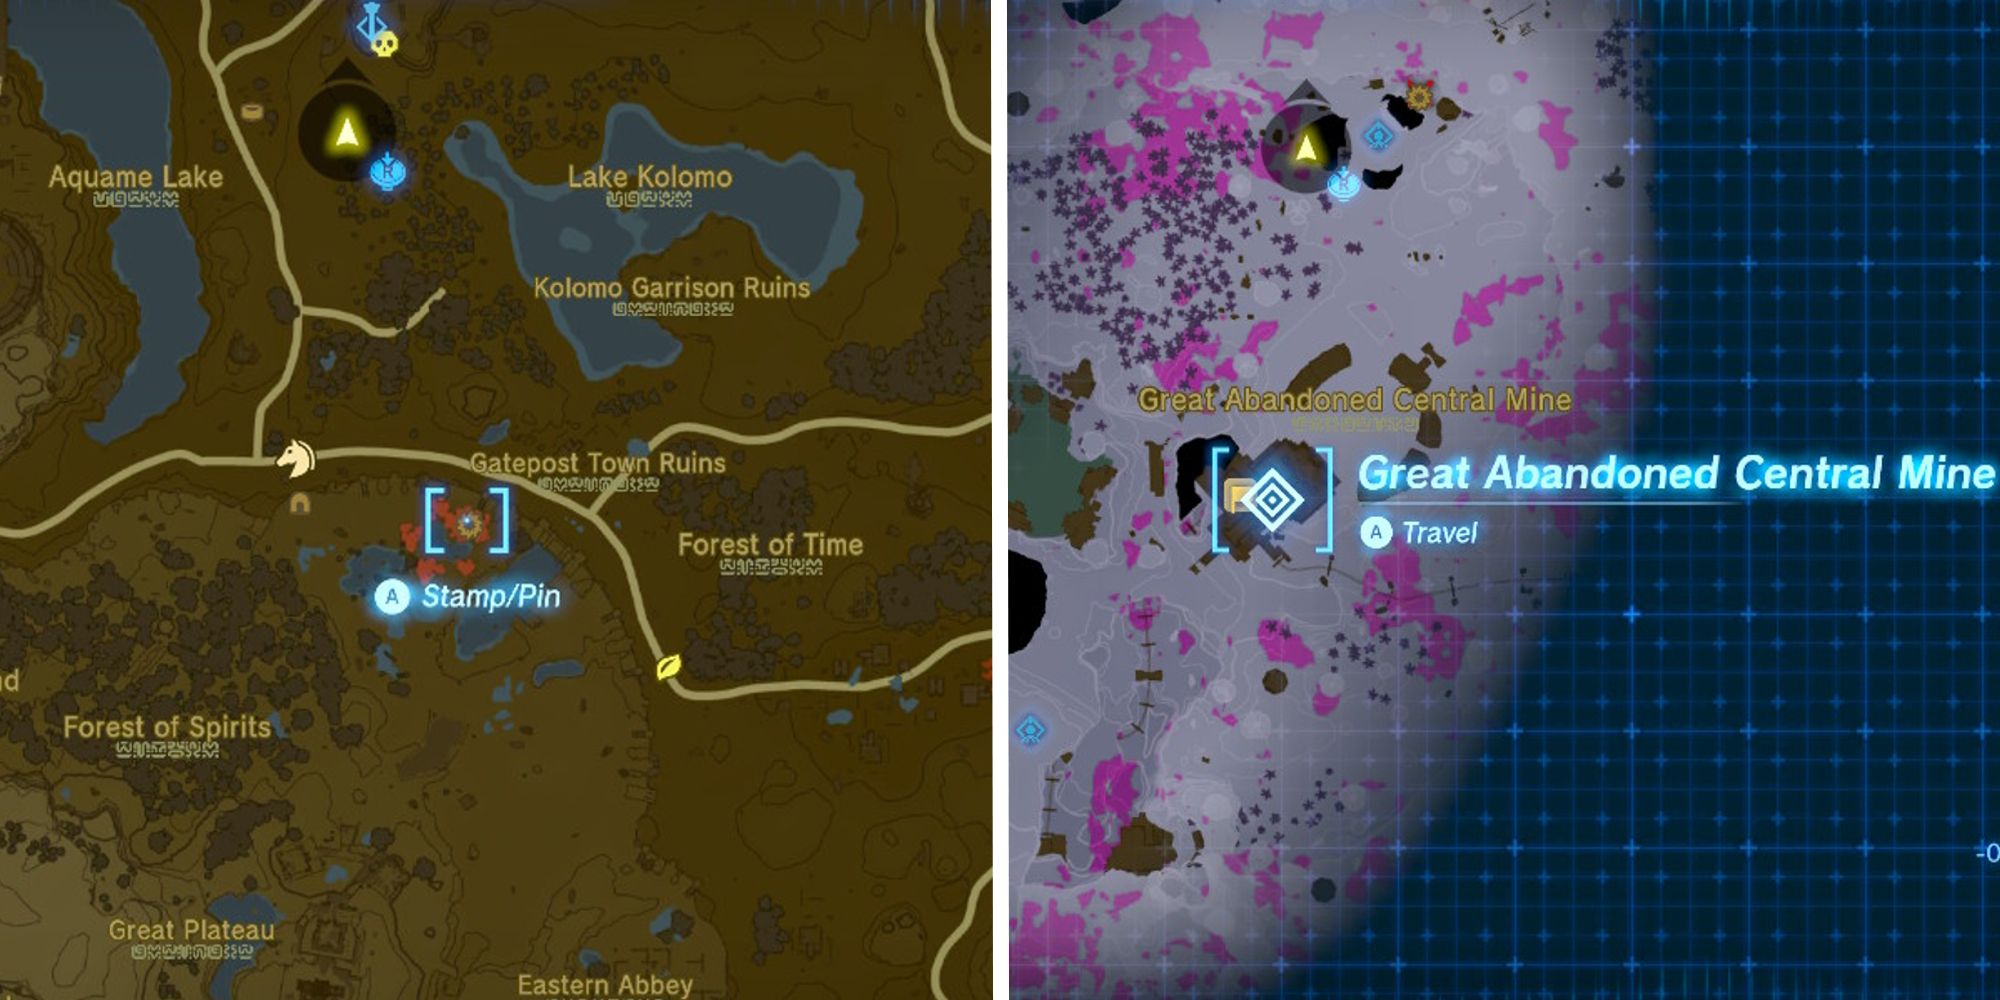 split image with chasm location selected, next to image of the great abandoned central mine on the map